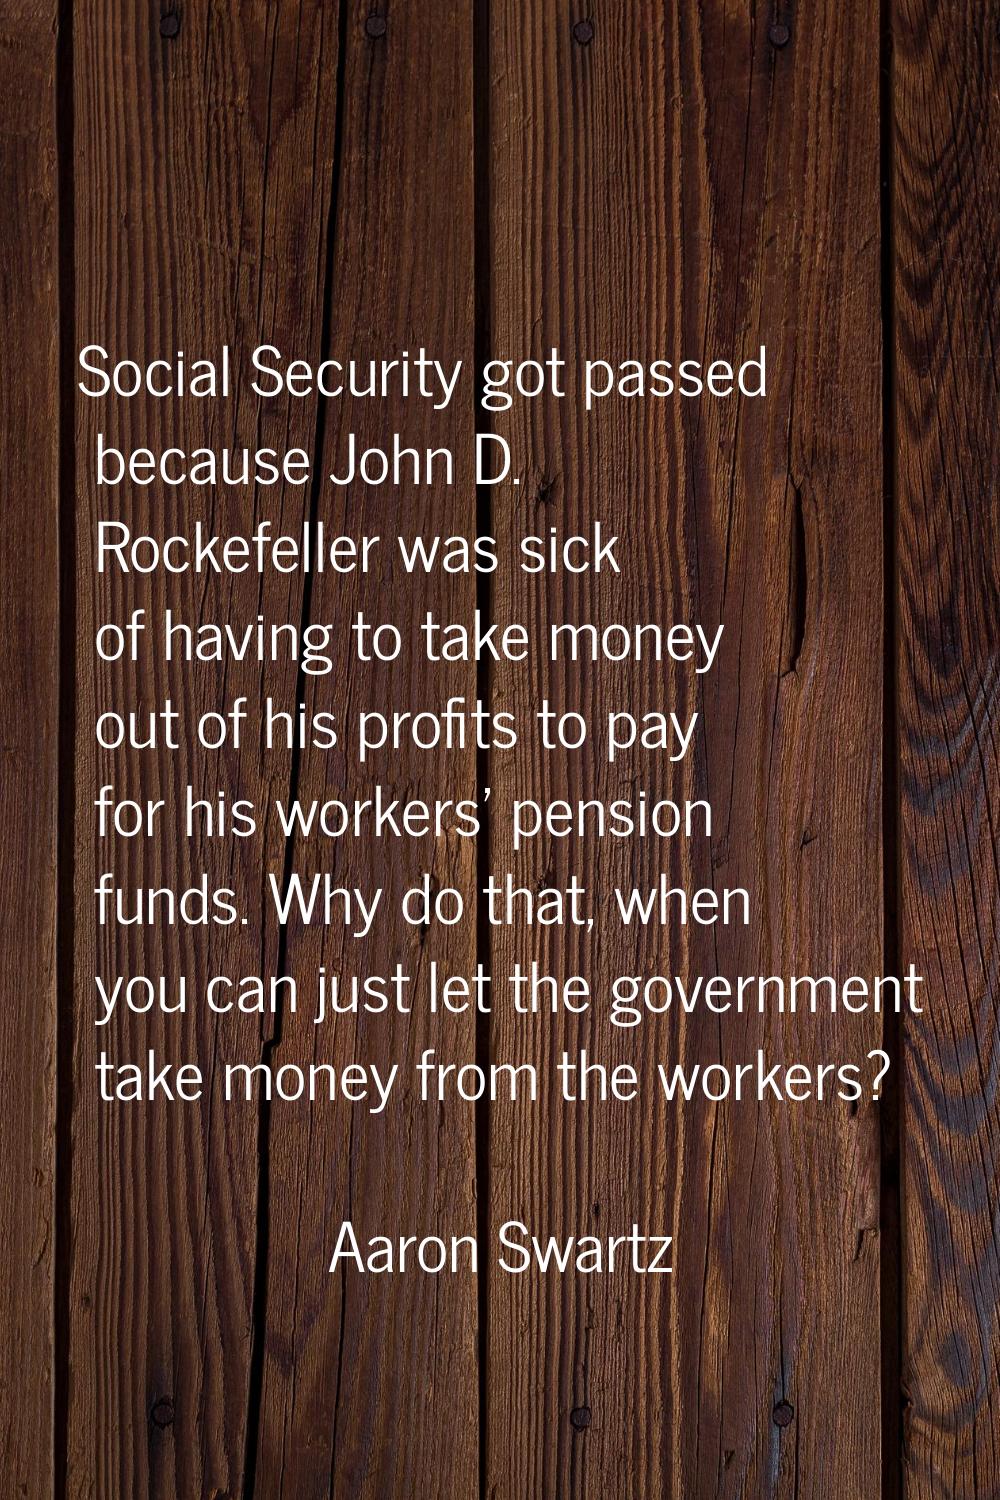 Social Security got passed because John D. Rockefeller was sick of having to take money out of his 